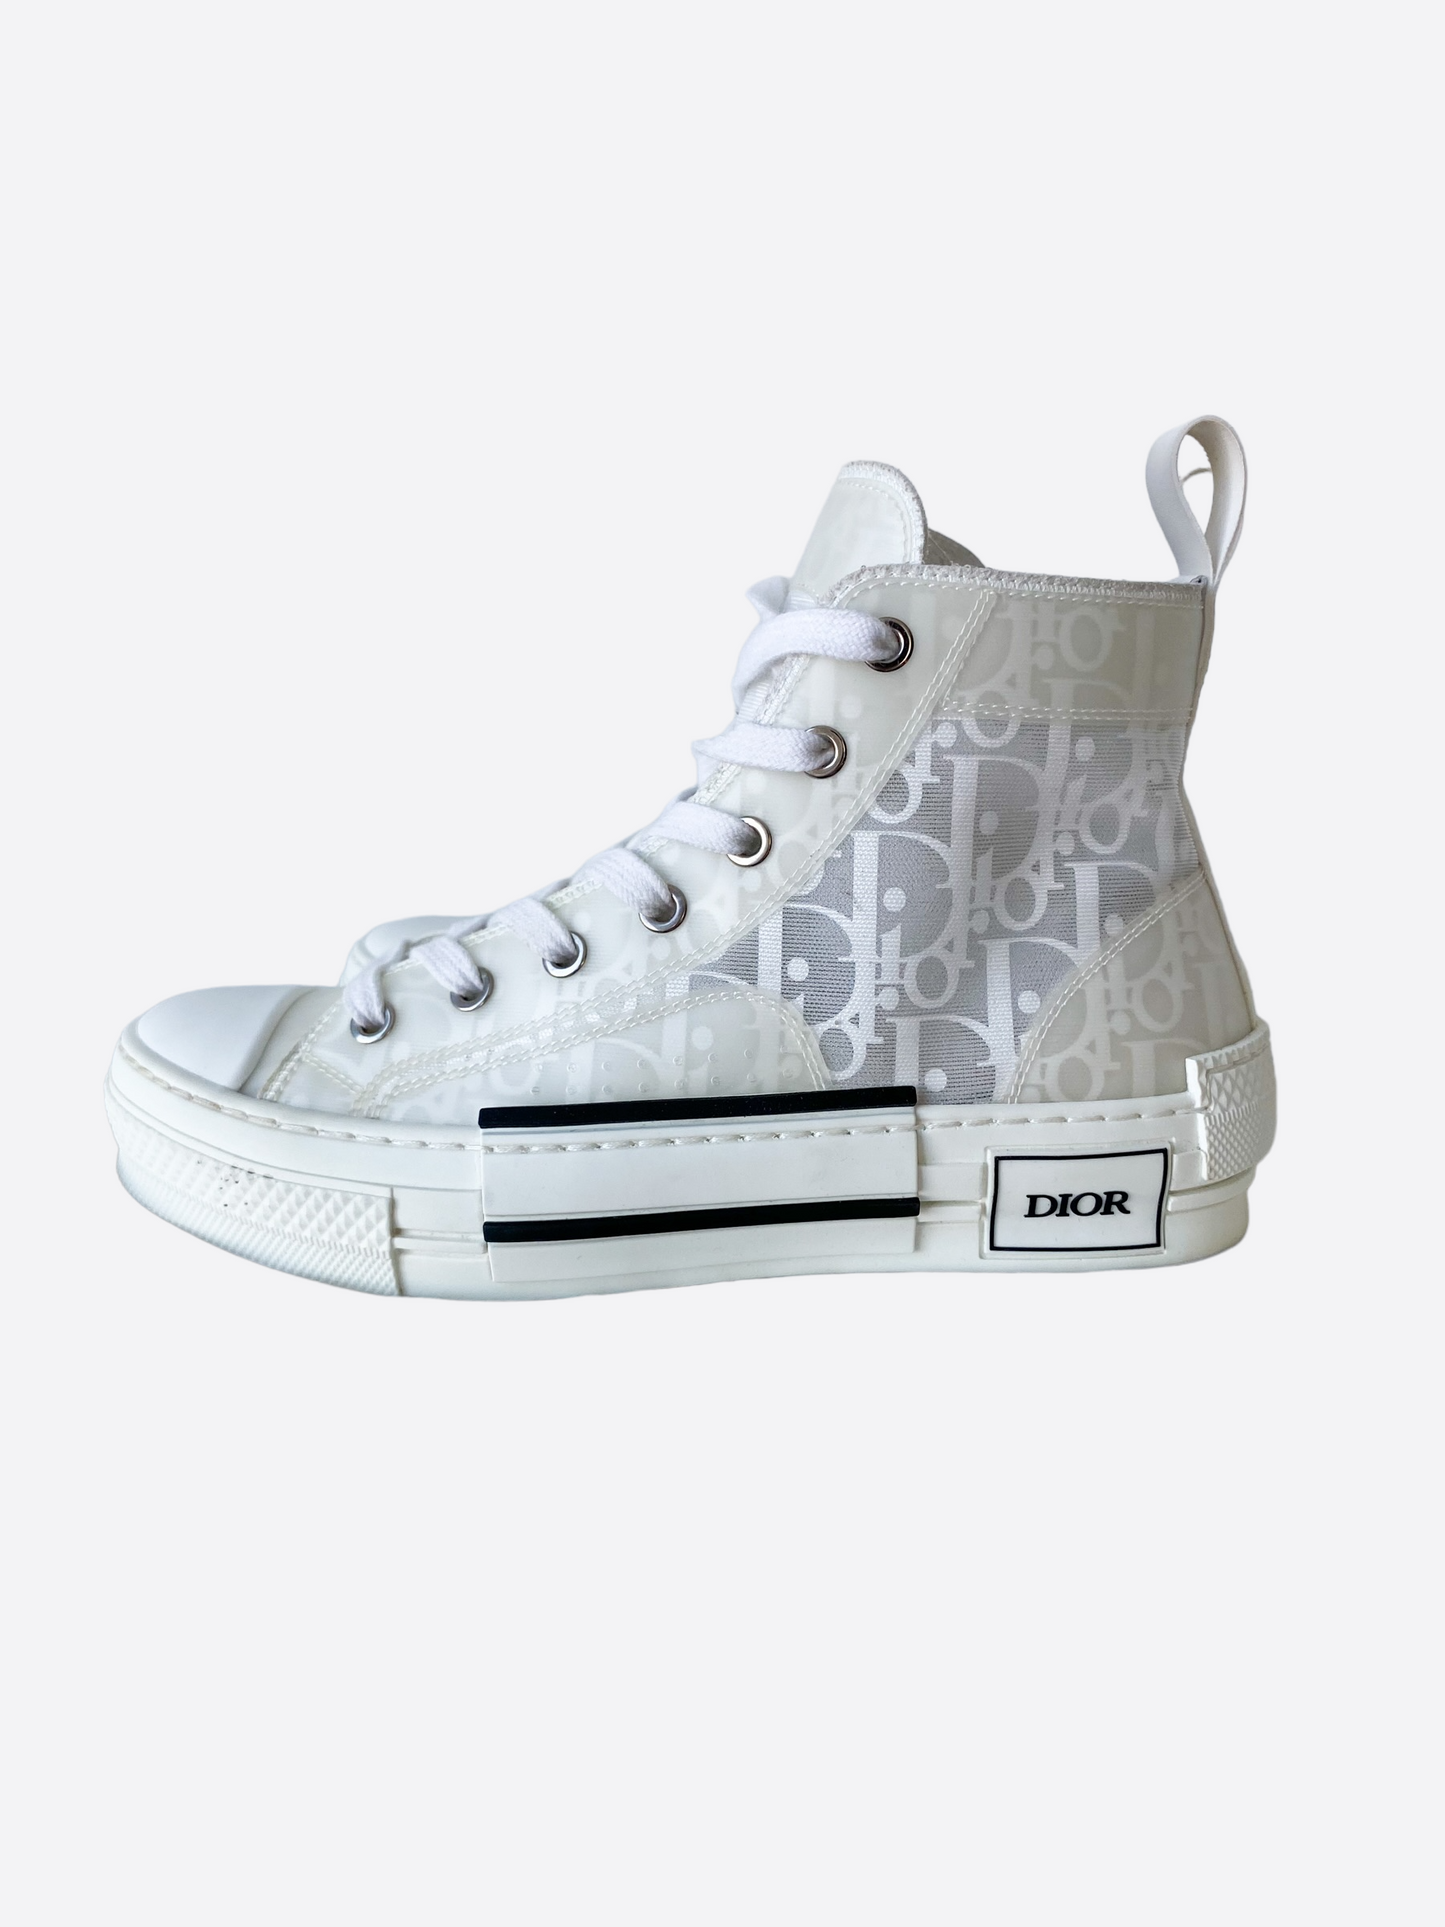 Dior White Oblique B23 Women's High Top Sneakers